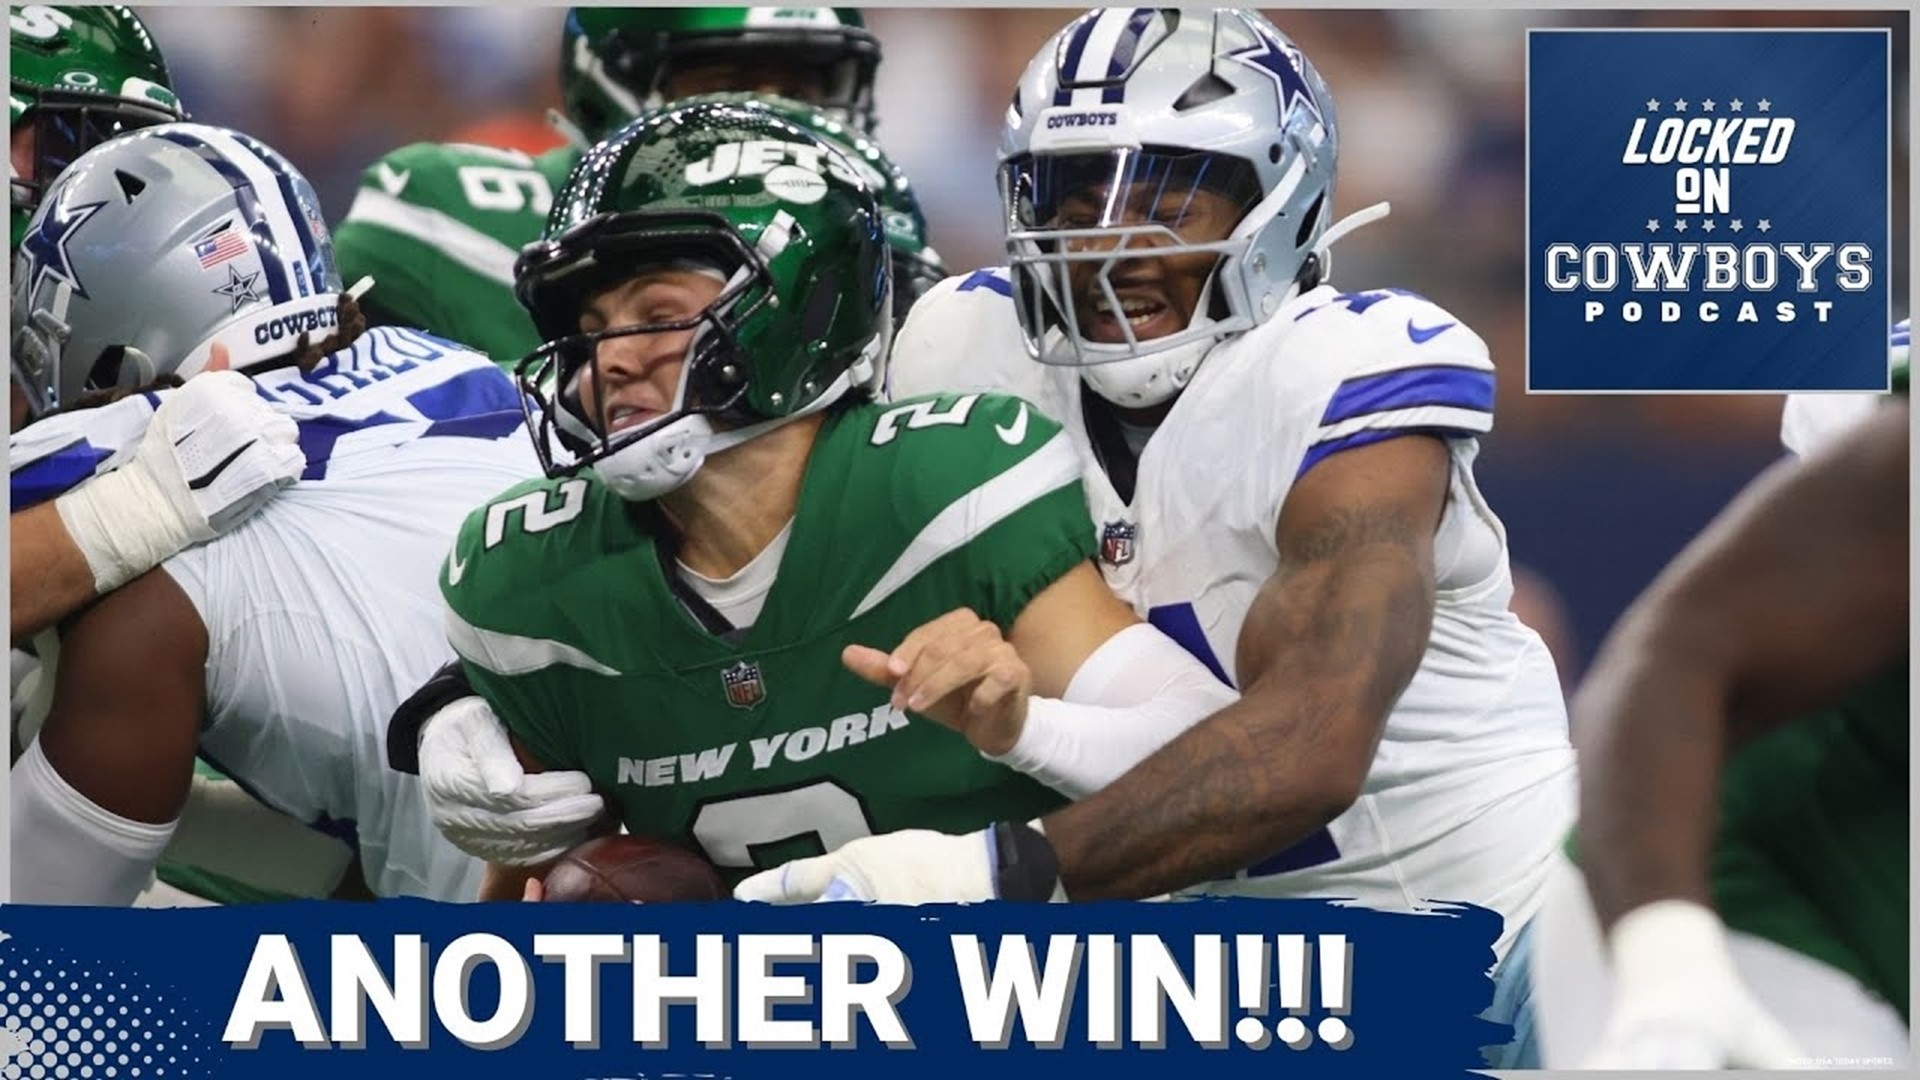 The Dallas Cowboys have won again, starting the season off with a 2-0 record. They defeated the New York Jets 30-0 after forcing four turnovers on defense.